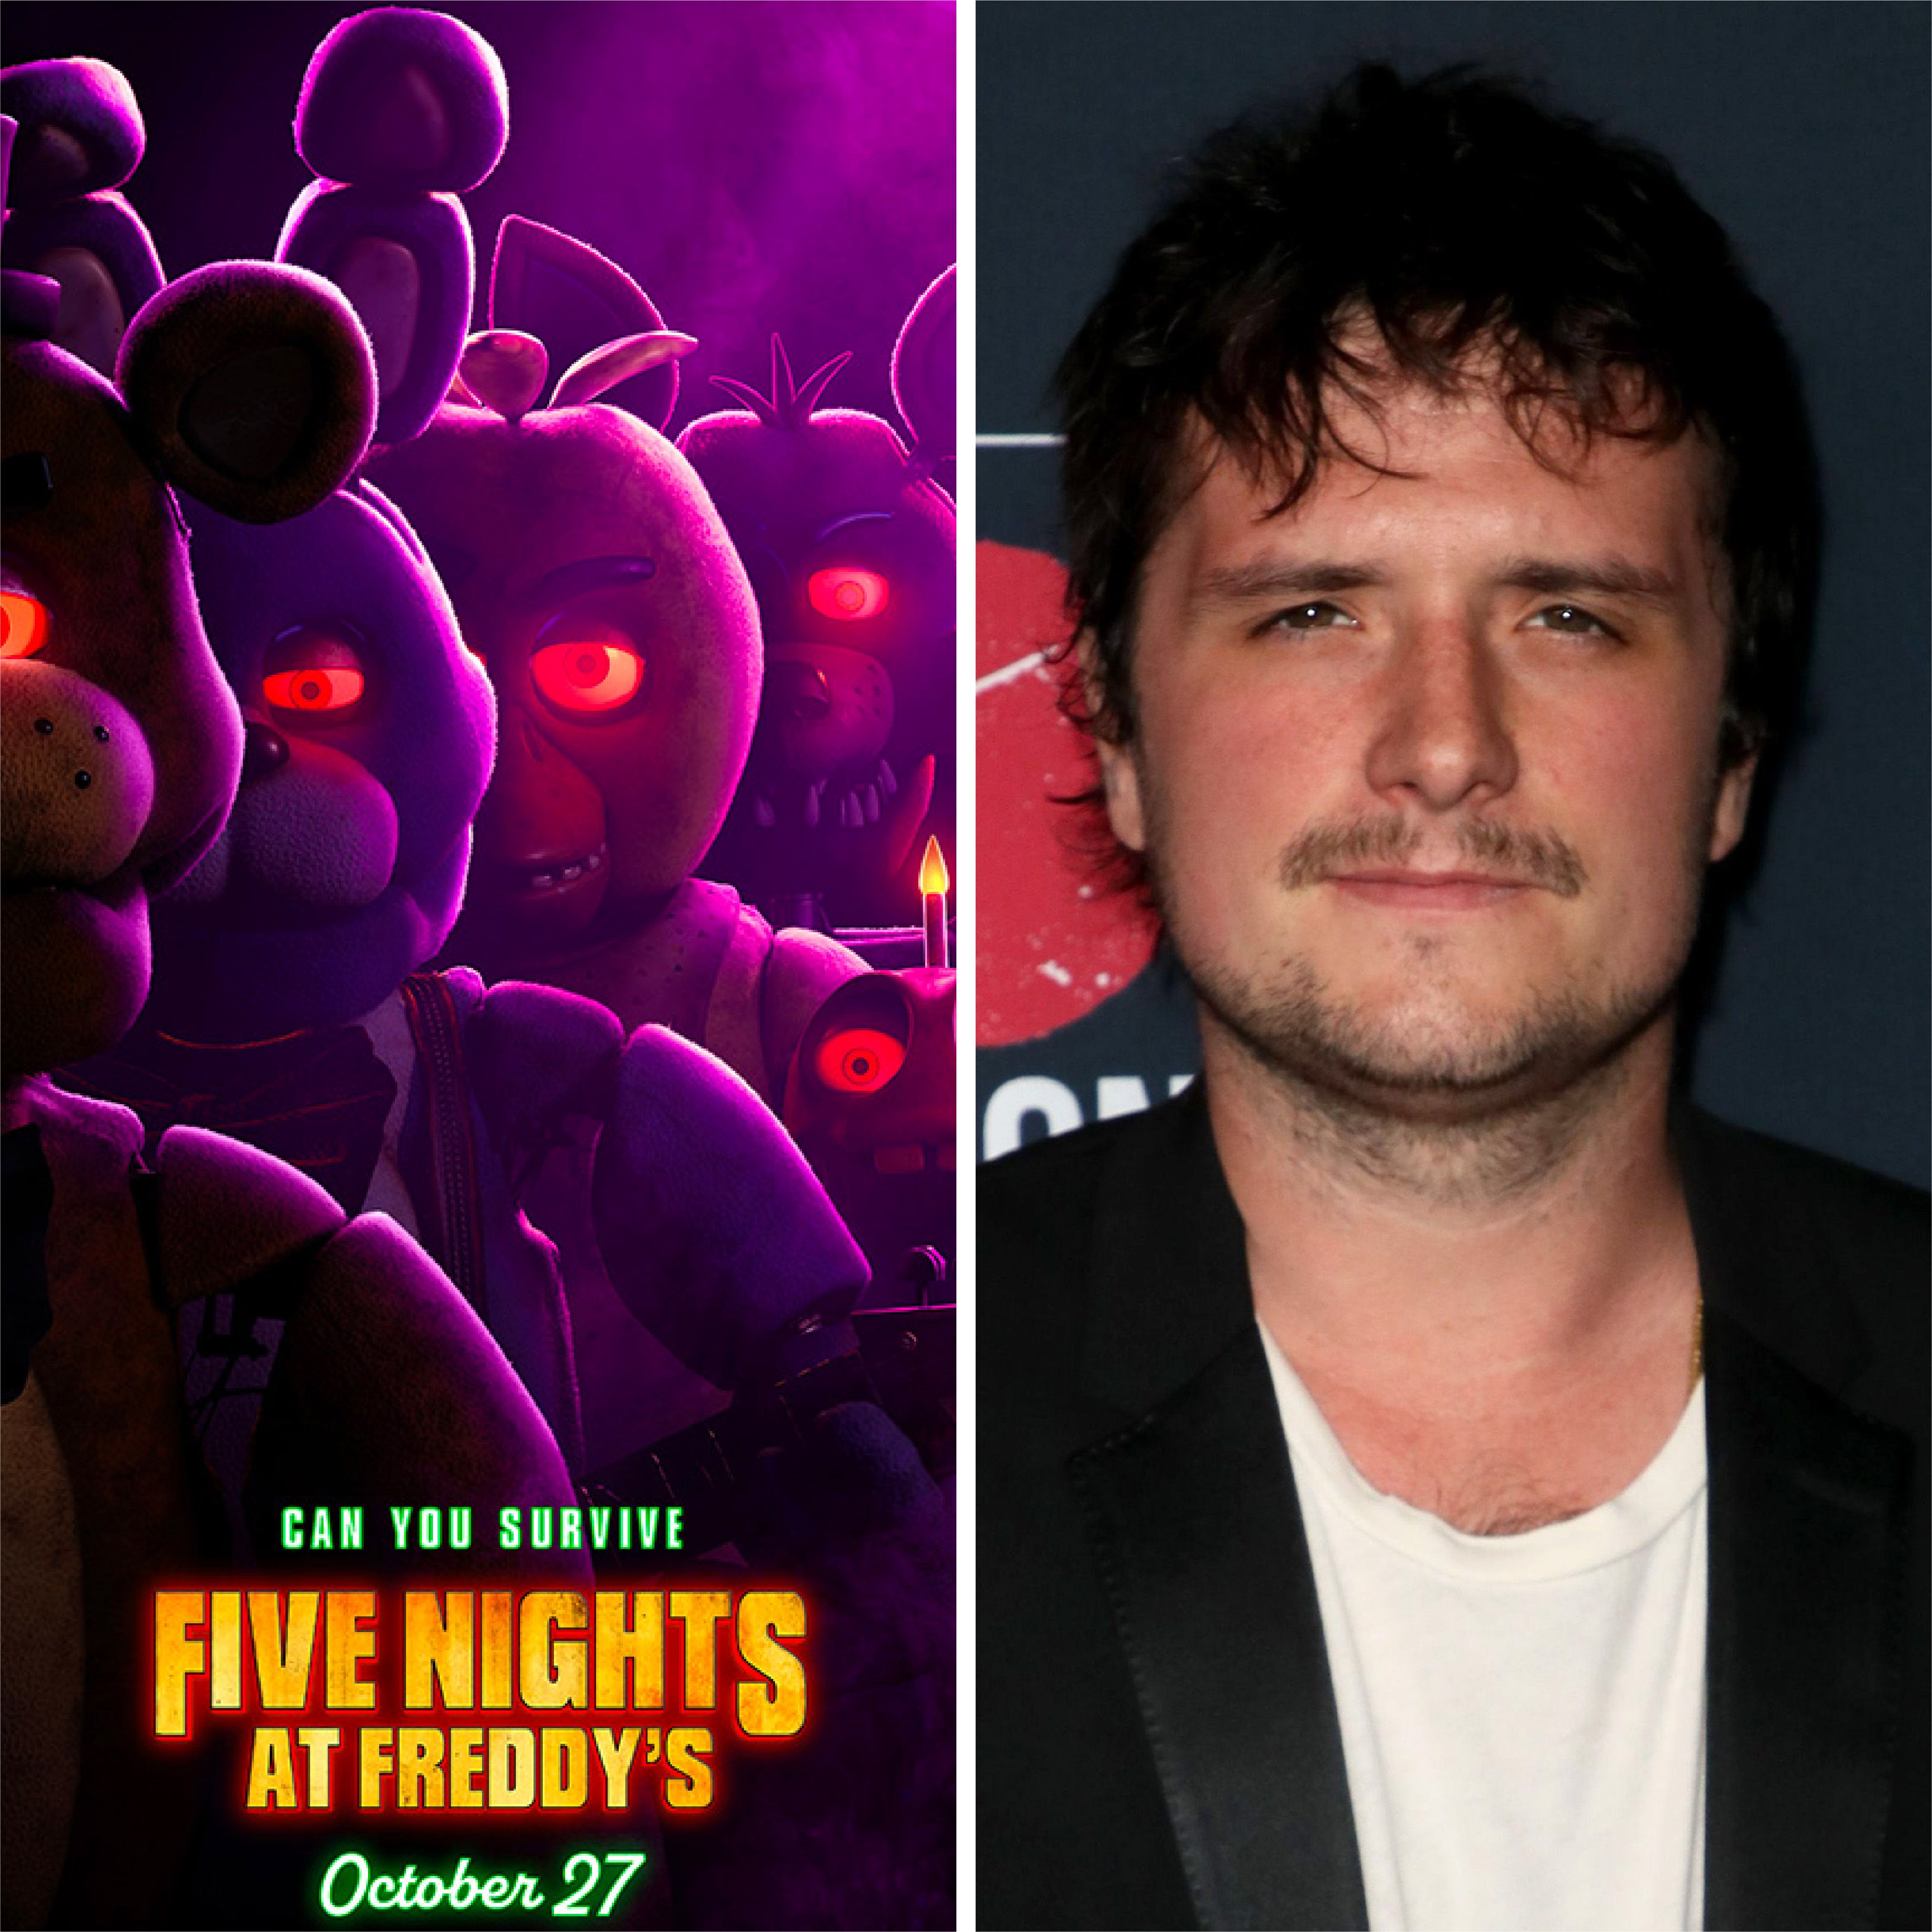 Five Nights at Freddy's Movie - Release Date, Cast, and More